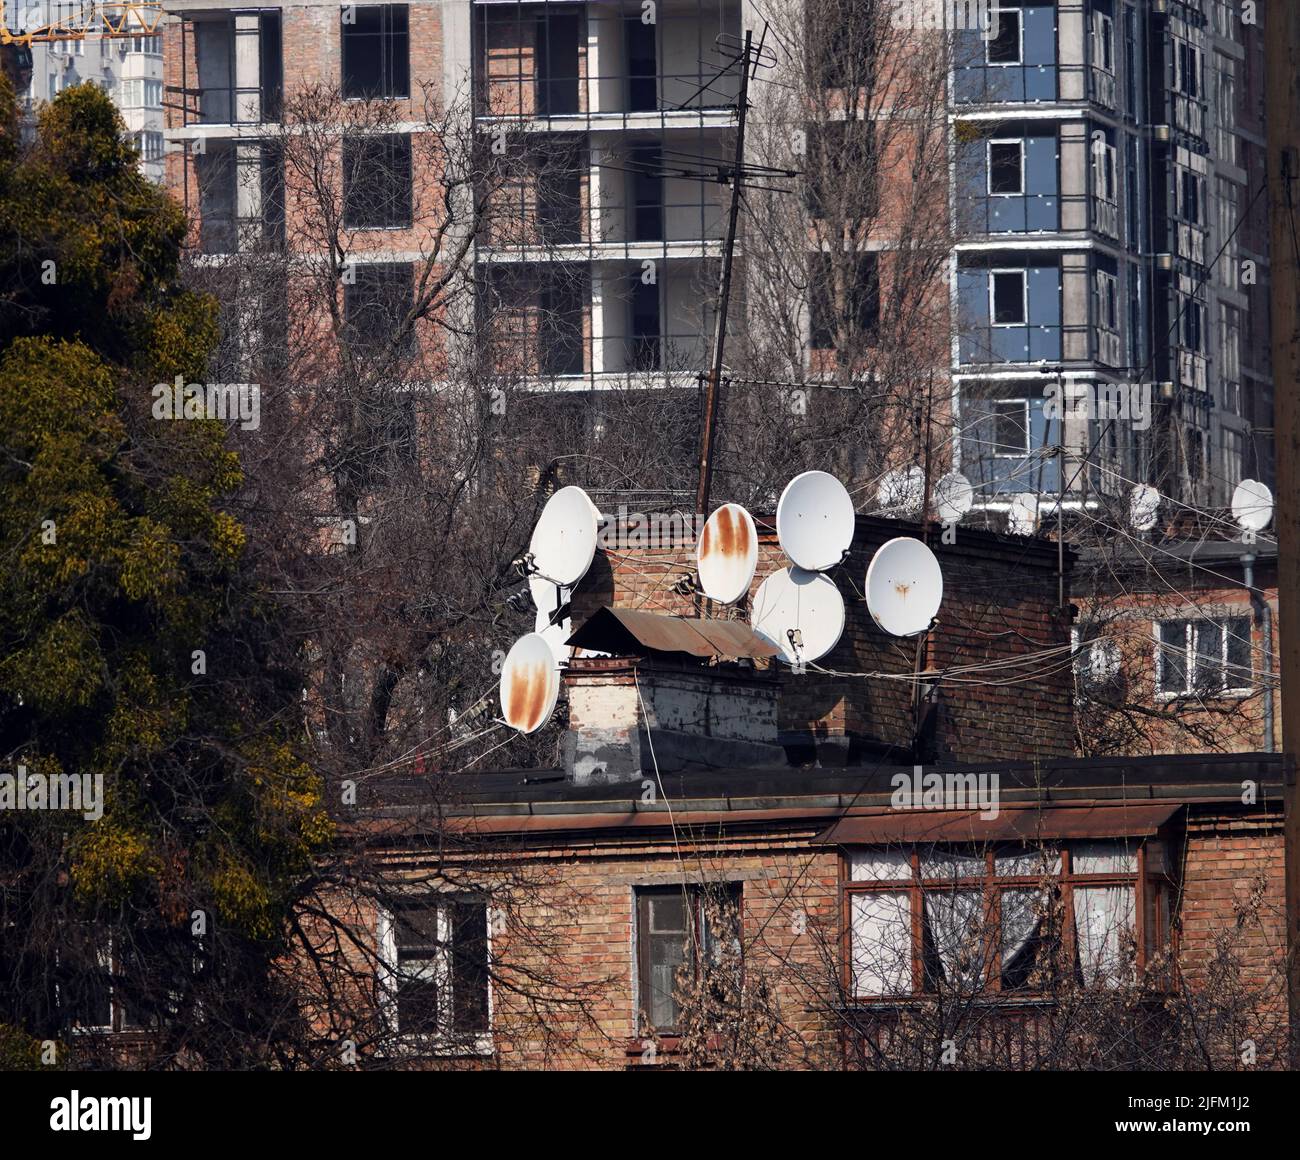 Plates for receiving TV channels on the roofs of houses Stock Photo